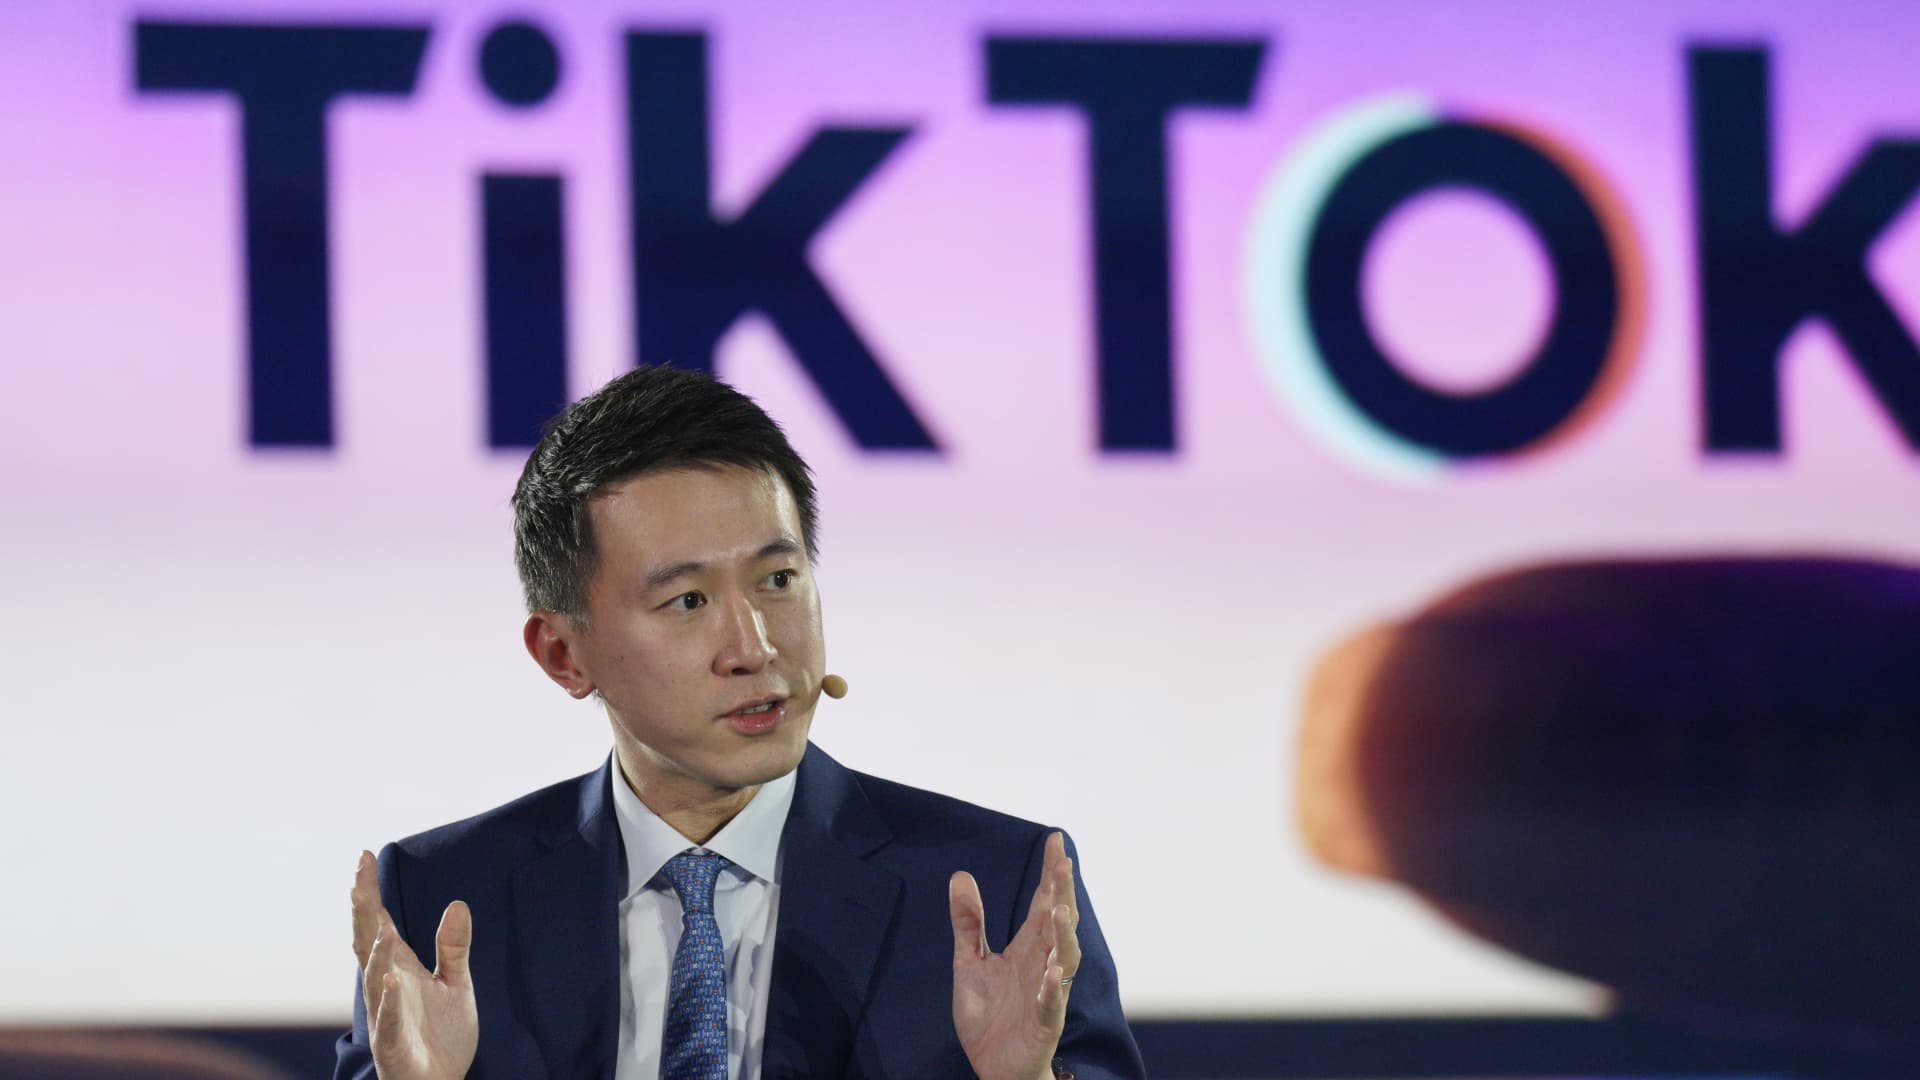 Senators pressure CFIUS to wrap up TikTok probe with strict restrictions, potentially even separating it from its Chinese parent company